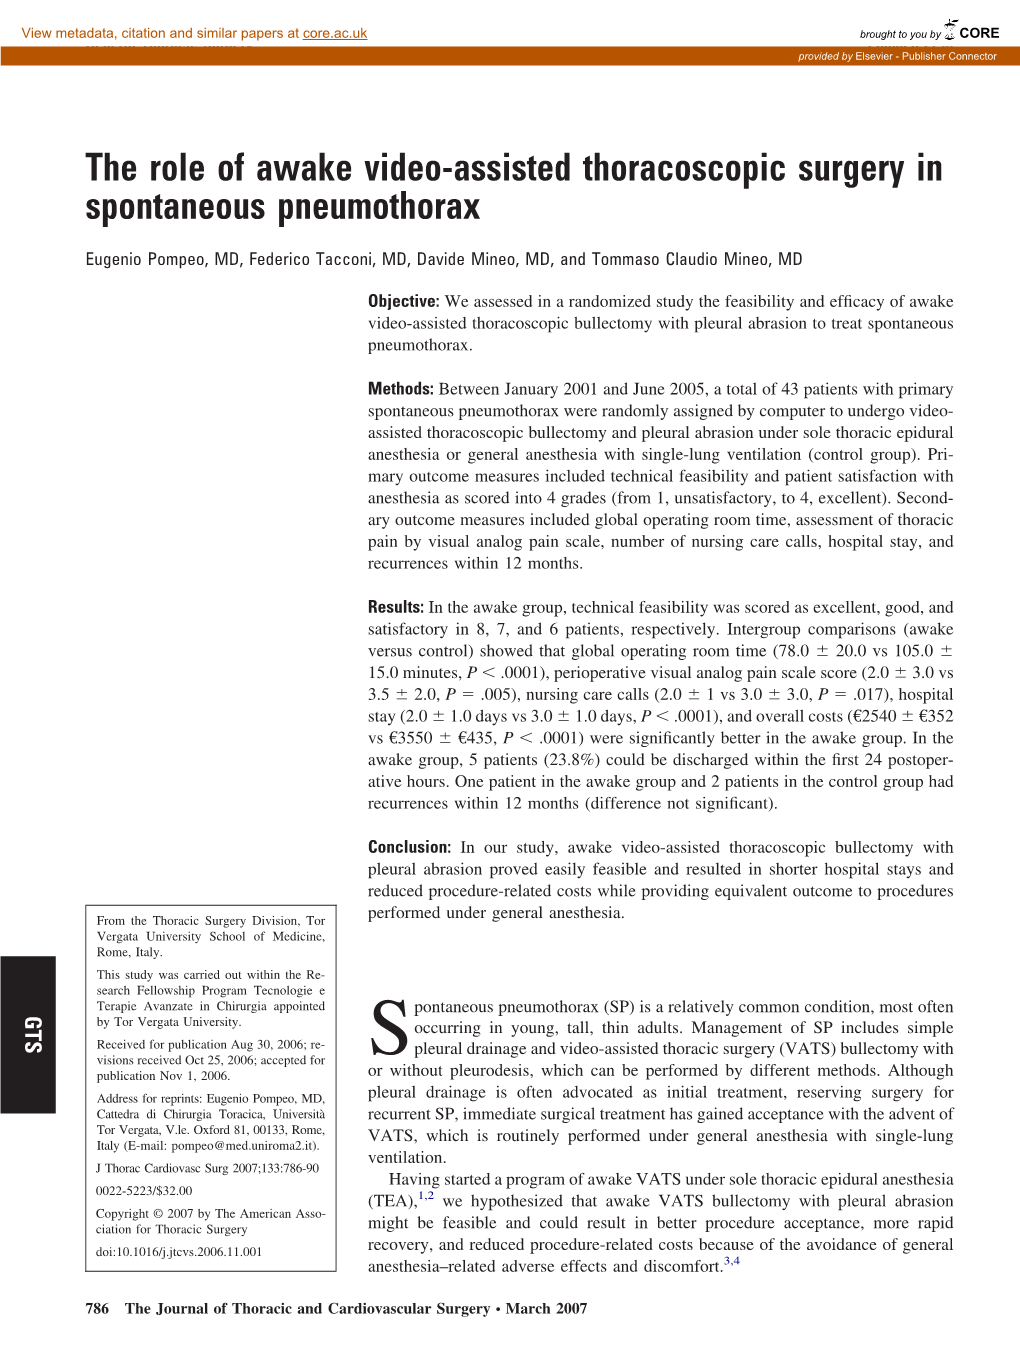 The Role of Awake Video-Assisted Thoracoscopic Surgery in Spontaneous Pneumothorax